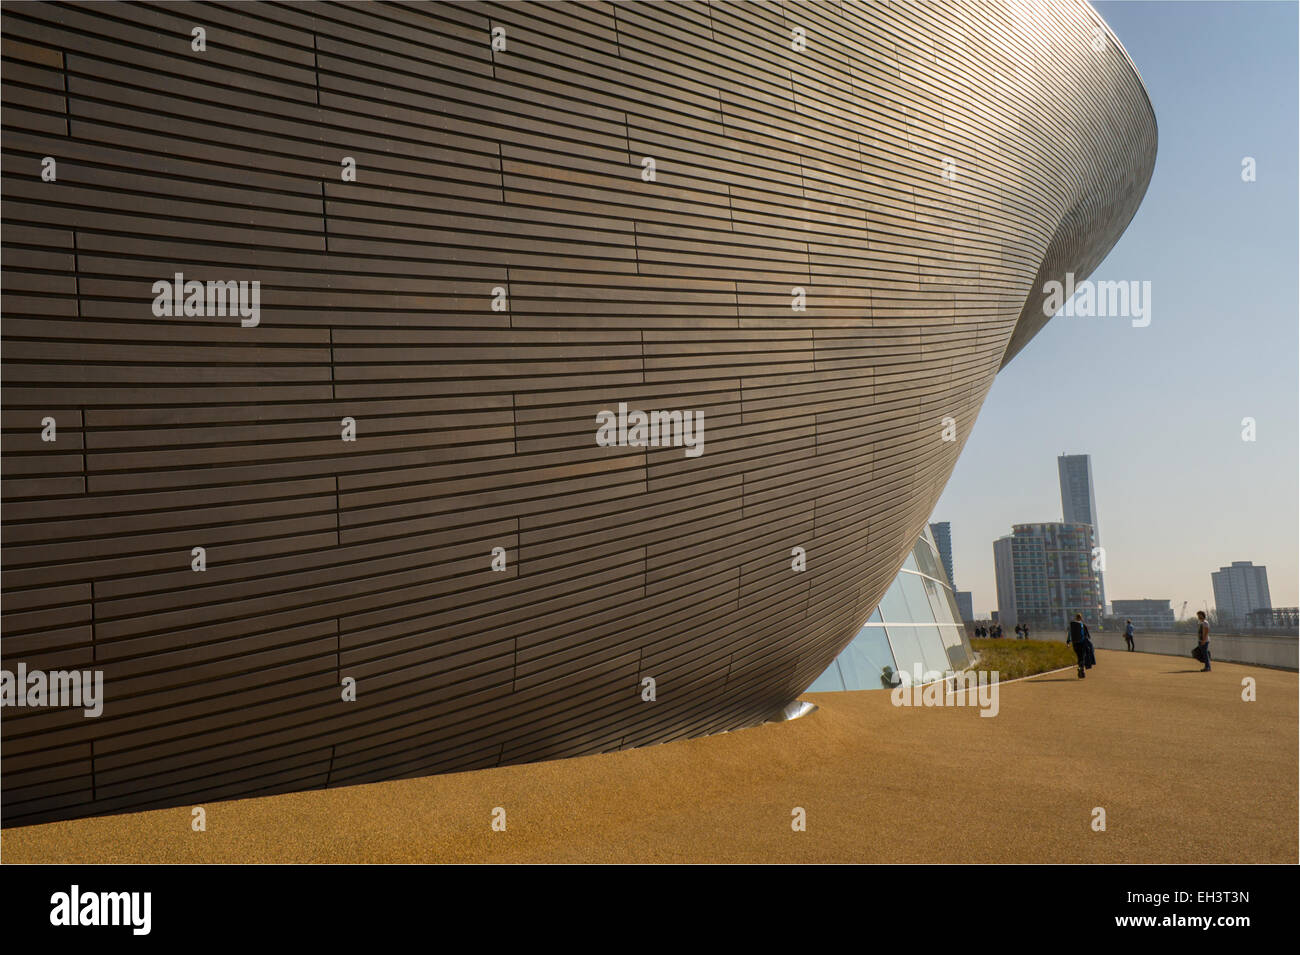 Exterior of the London Aquatics Centre at Stratford city designed by Zaha Hadid architects and build by Ove Arup and Partners fo Stock Photo